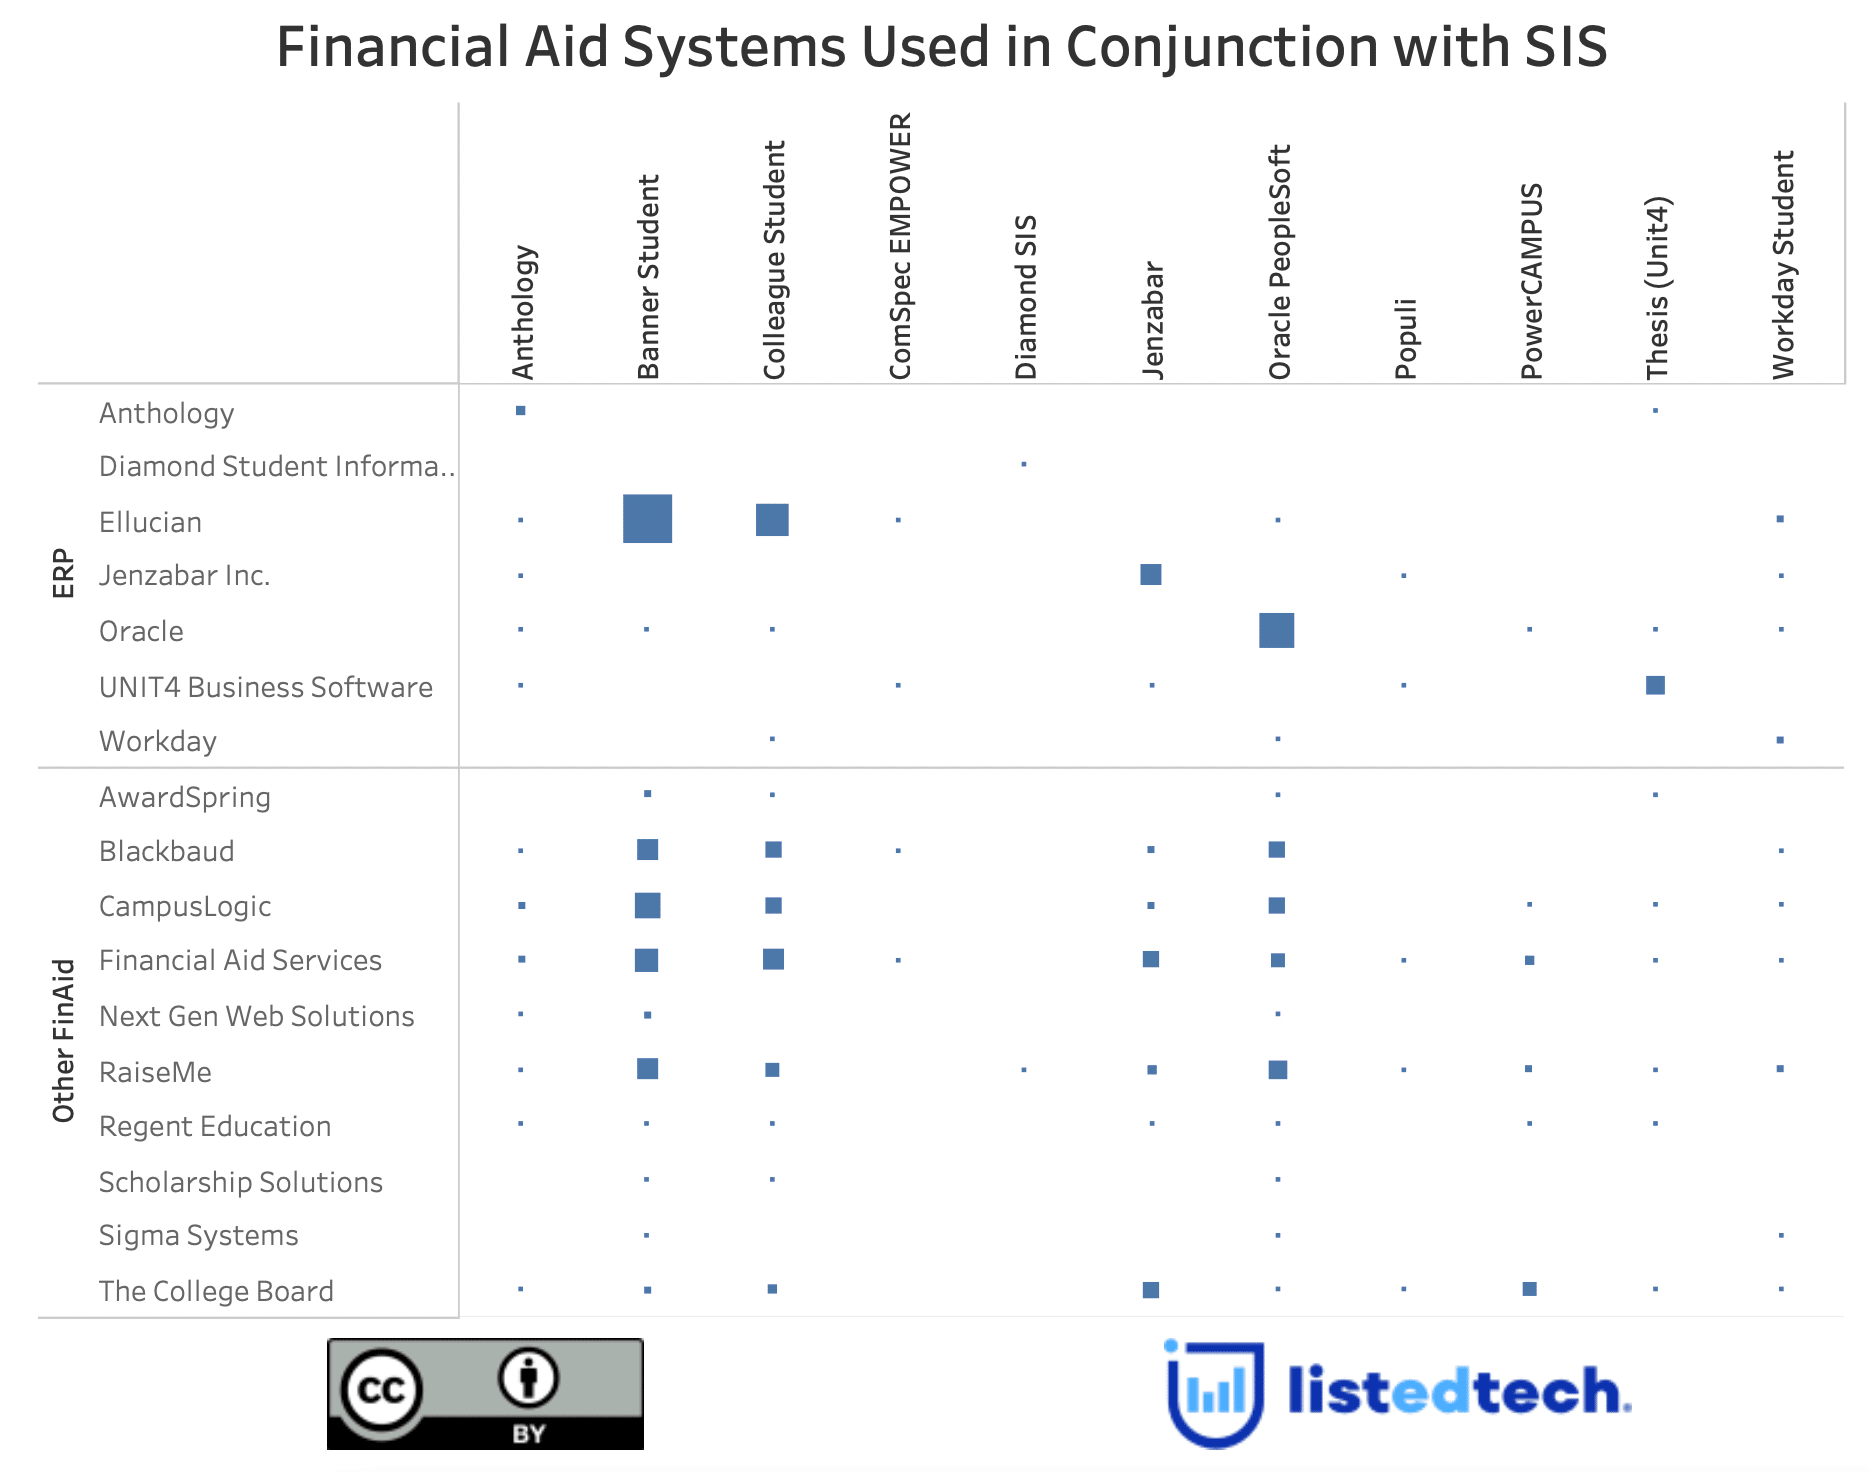 Financial Aid Systems Used in Conjunction with SIS